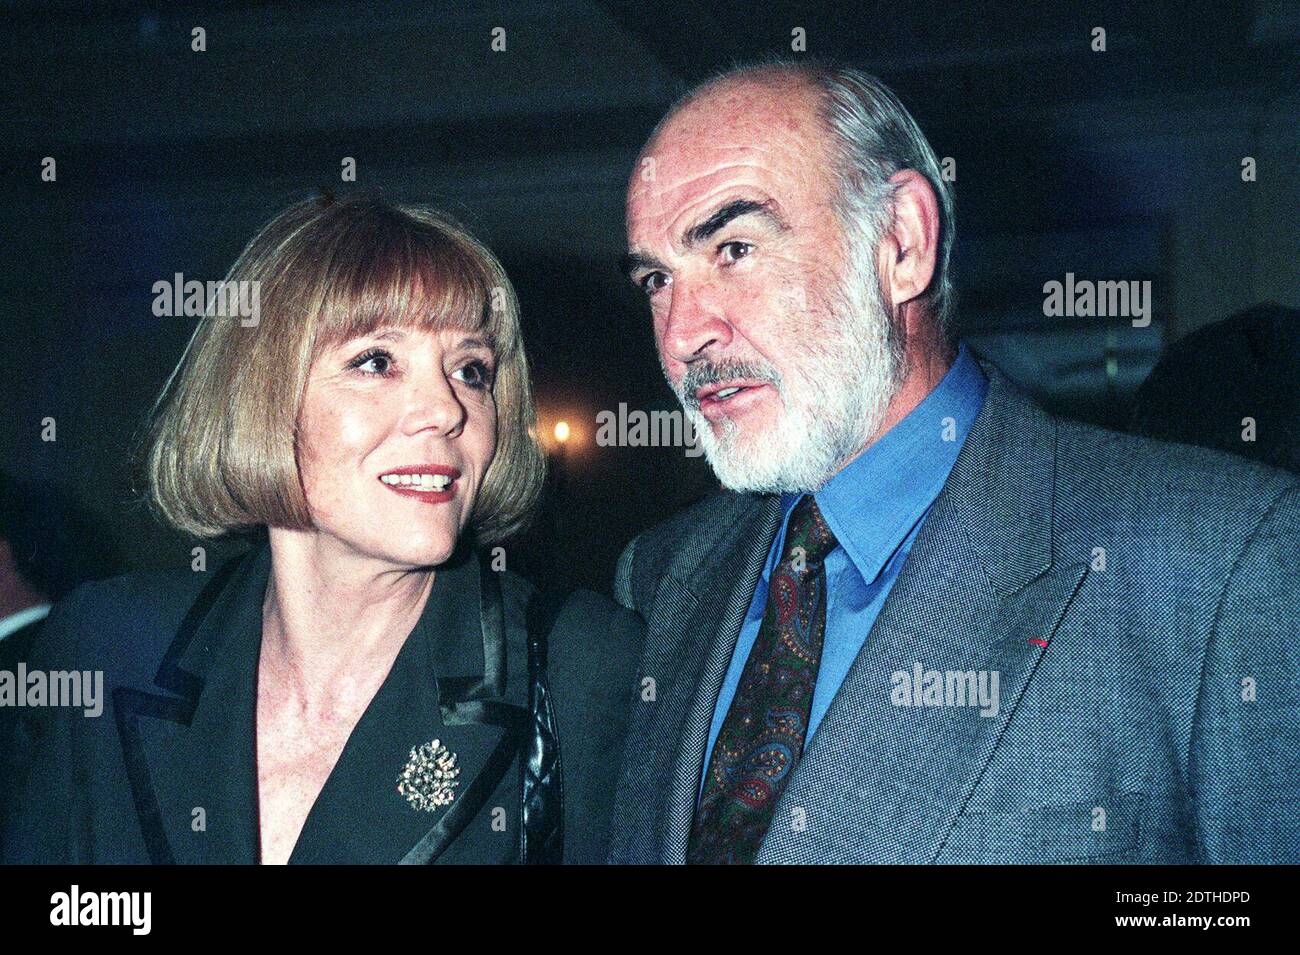 PA REVIEW OF THE YEAR 2020 File photo dated 29/11/96 of Dame Diana Rigg and Sean Connery both of whom died this year. Actress Diana Rigg died on 10 September 2020, aged 82 and former James Bond actor Sir Sean Connery died aged 90, on 31 October 2020. Stock Photo